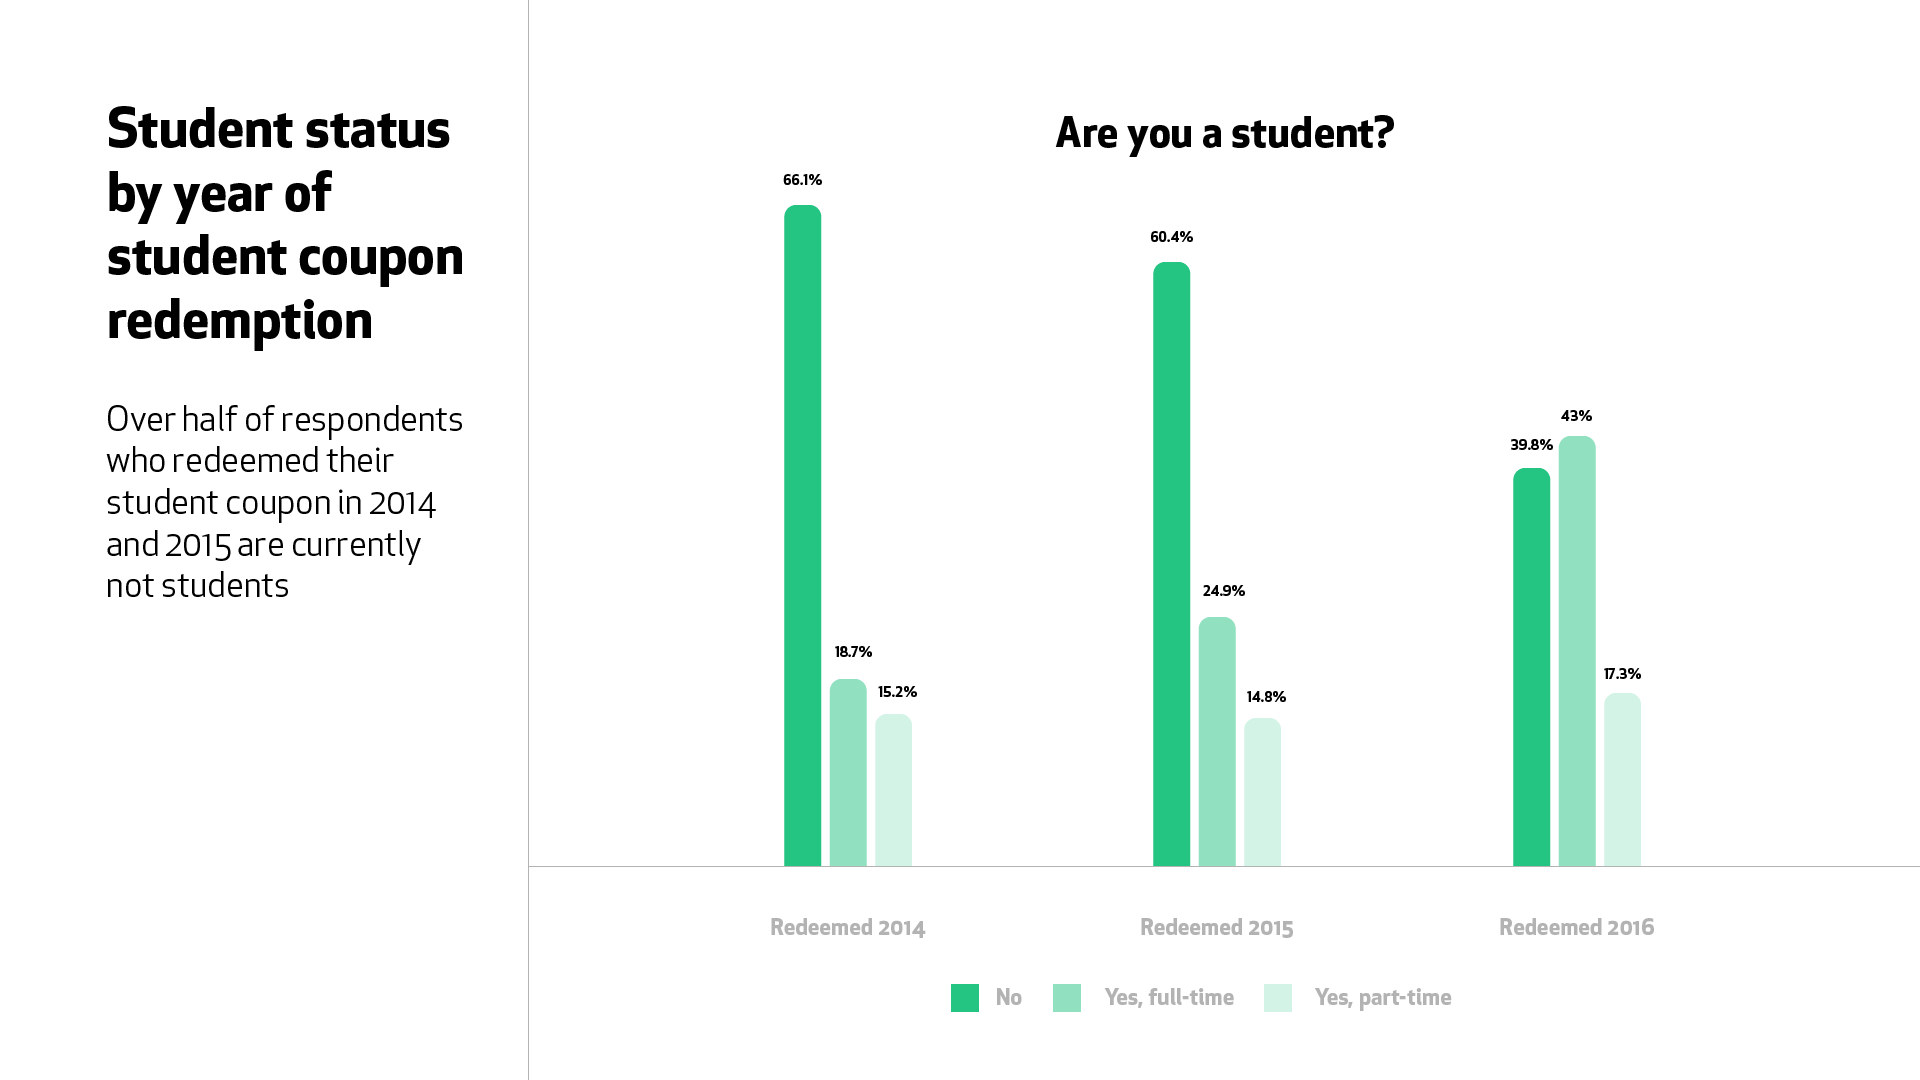 A graph for the question, “Are you a student?” Over half of respondents who joined student programs in 2014 (66.1%) or 2015 (60.4%) are current not students.